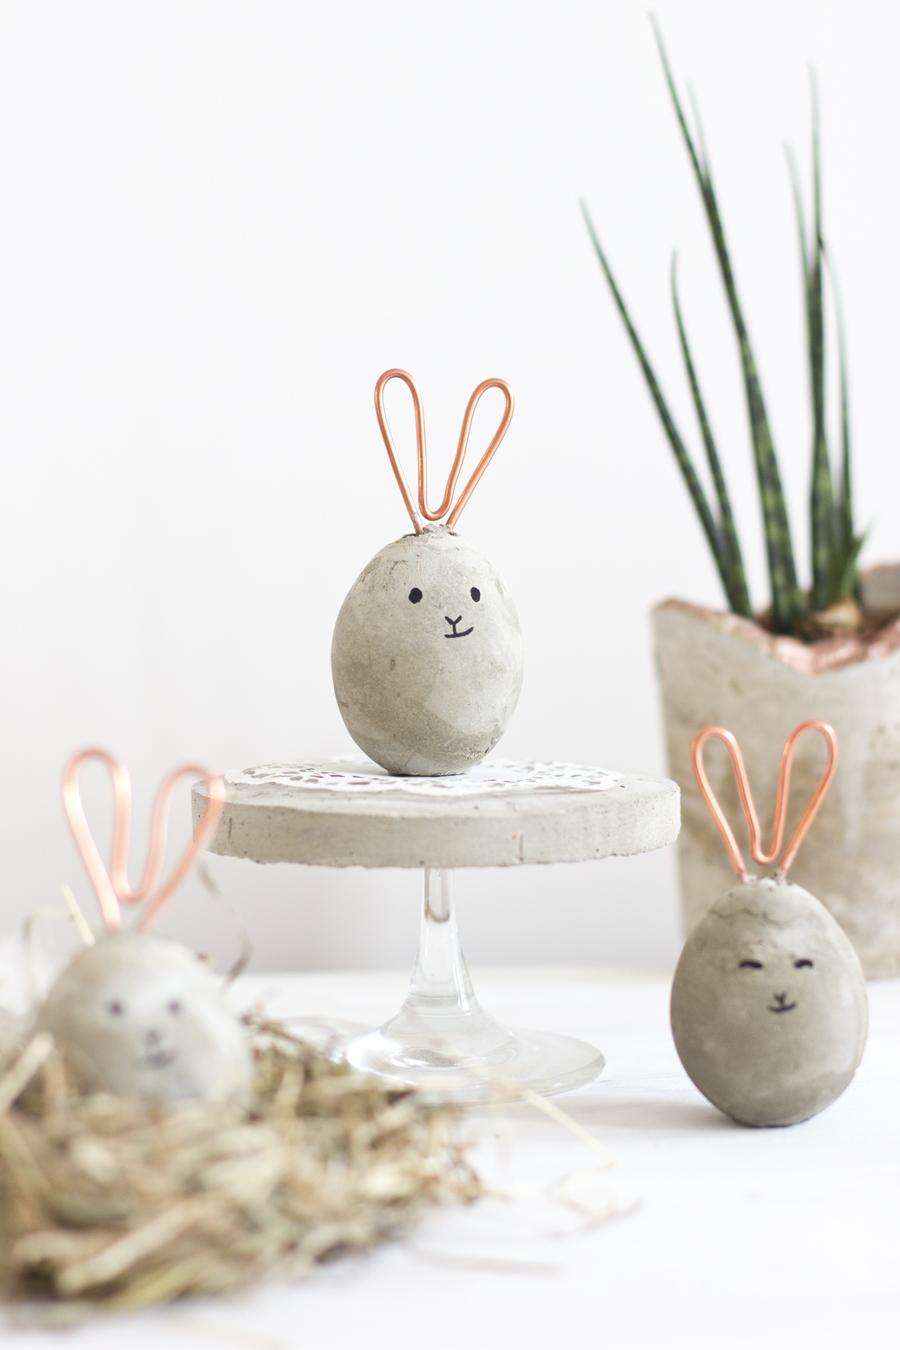 10 Modern And Easy DIY Concrete Crafts For Spring - Shelterness